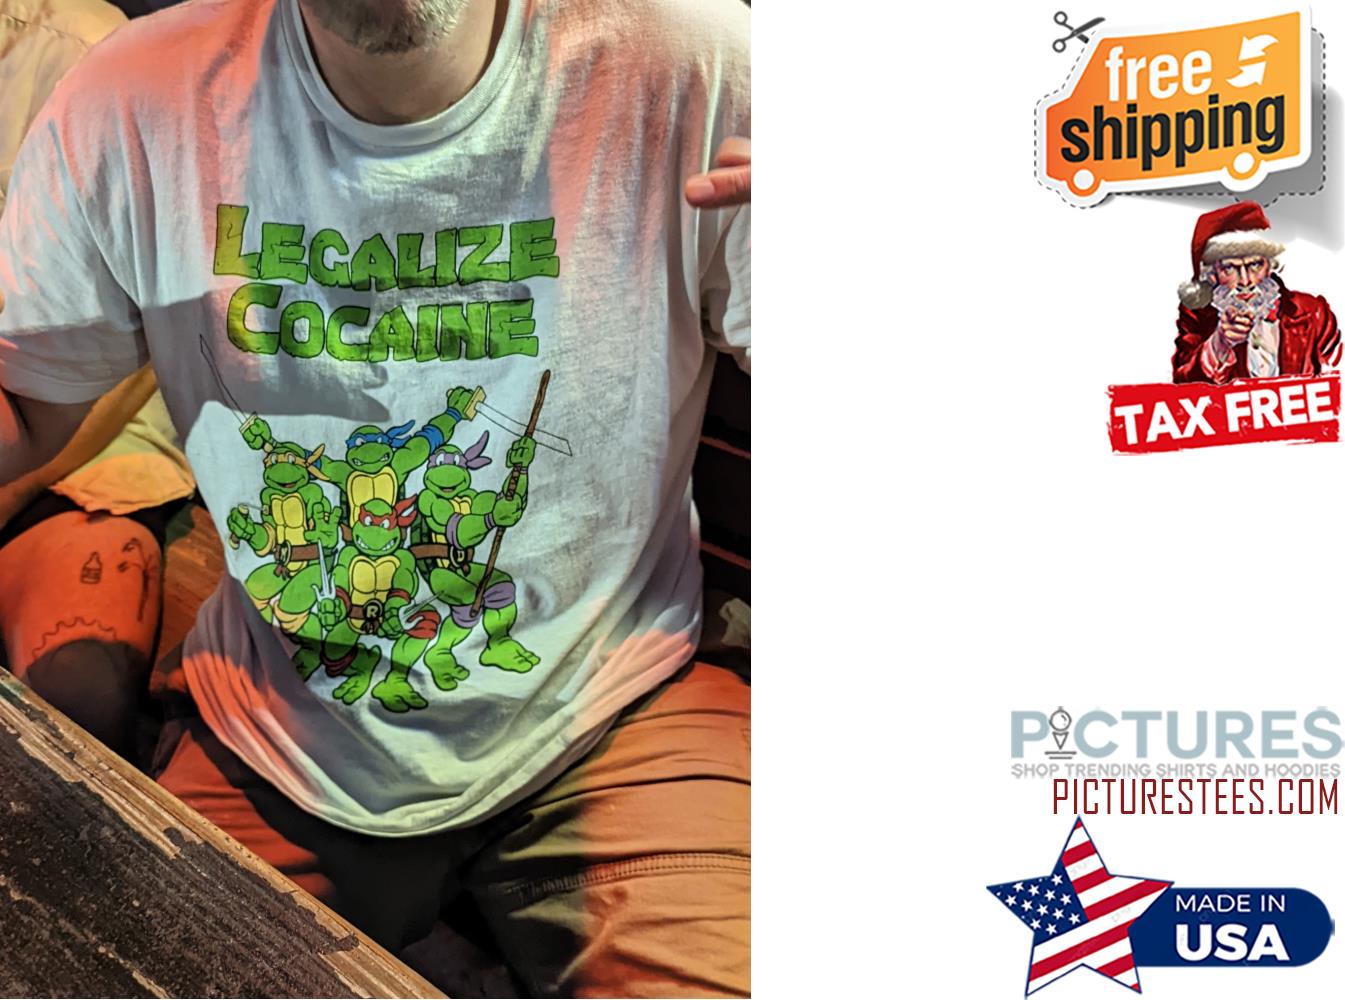 https://images.picturestees.com/2022/02/legalize-cocaine-green-frog-shirt-picturestees-shirt.jpg